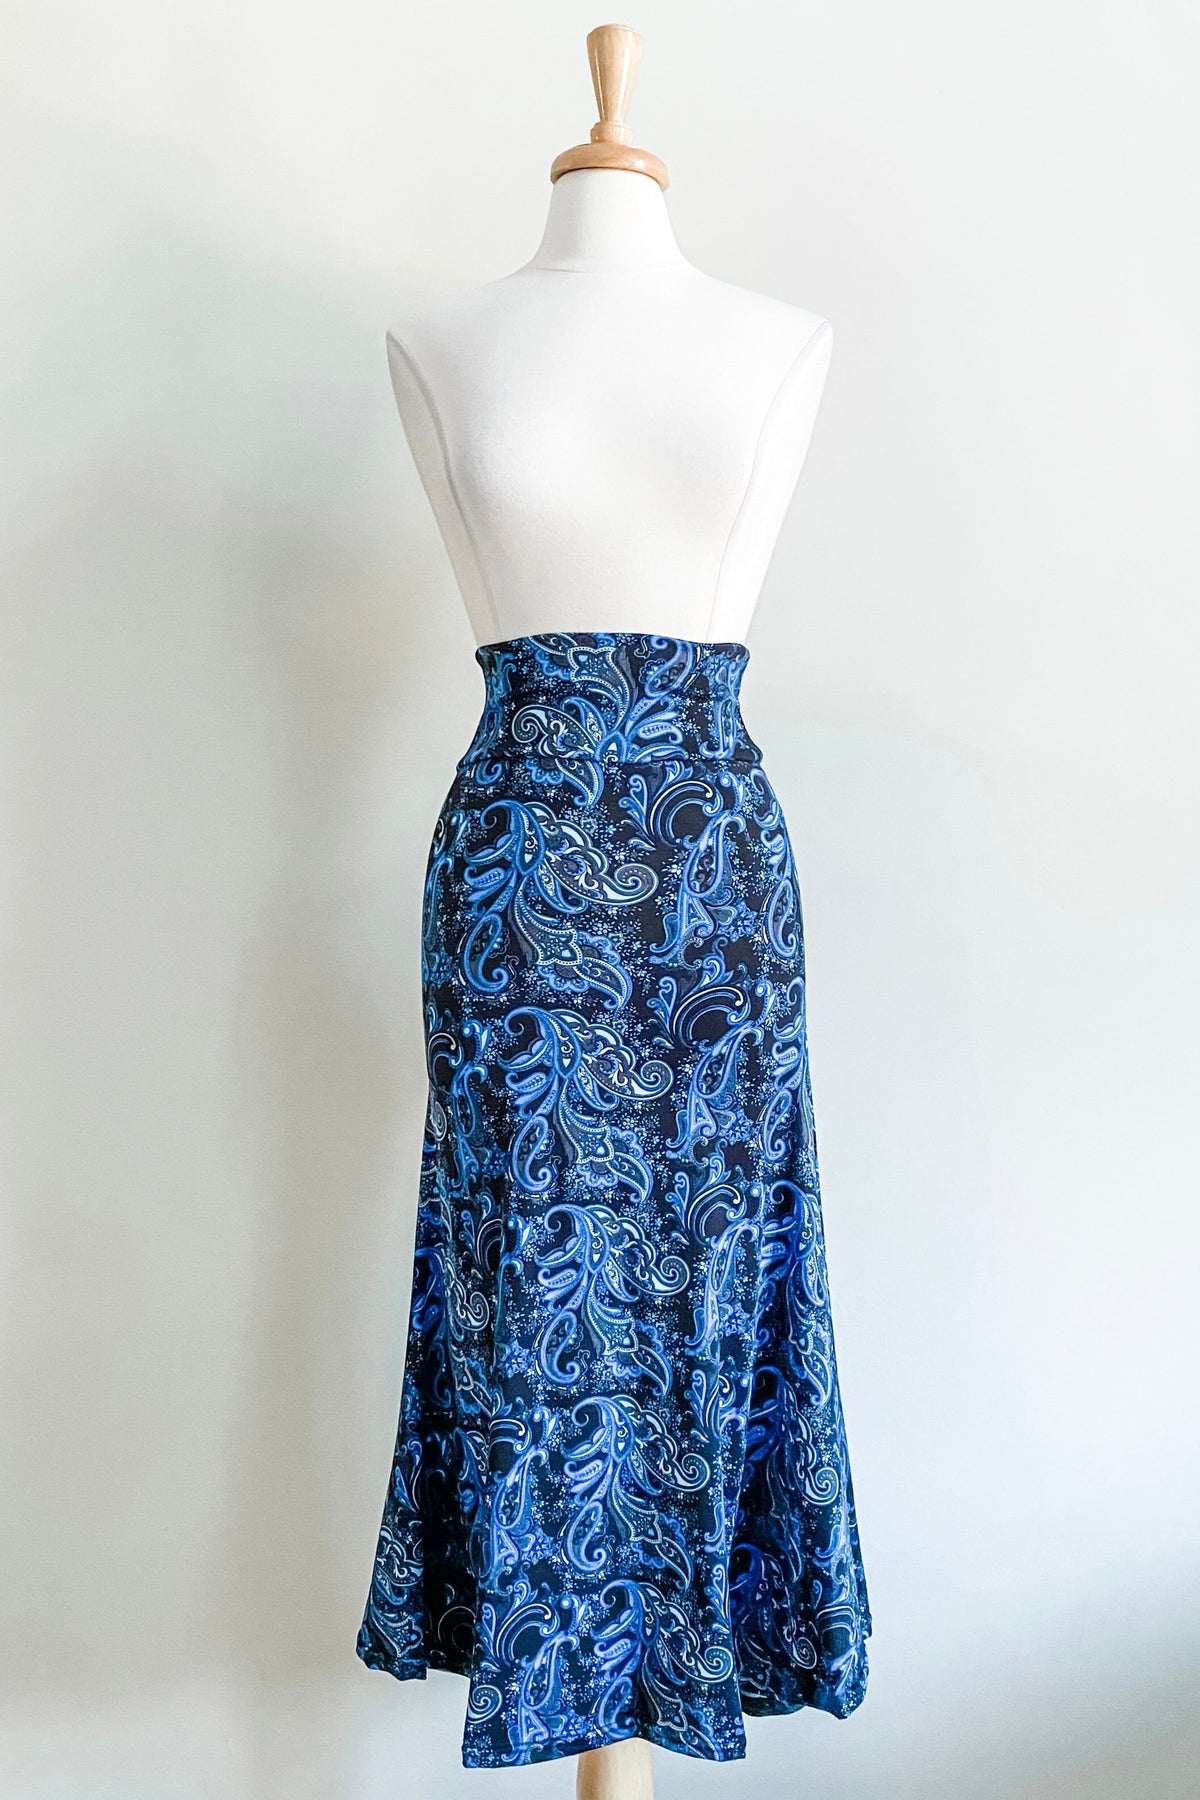 Diane Kroe Wear-Ever Skirt Dress (Blue Paisley) - The Classic Capsule Collection